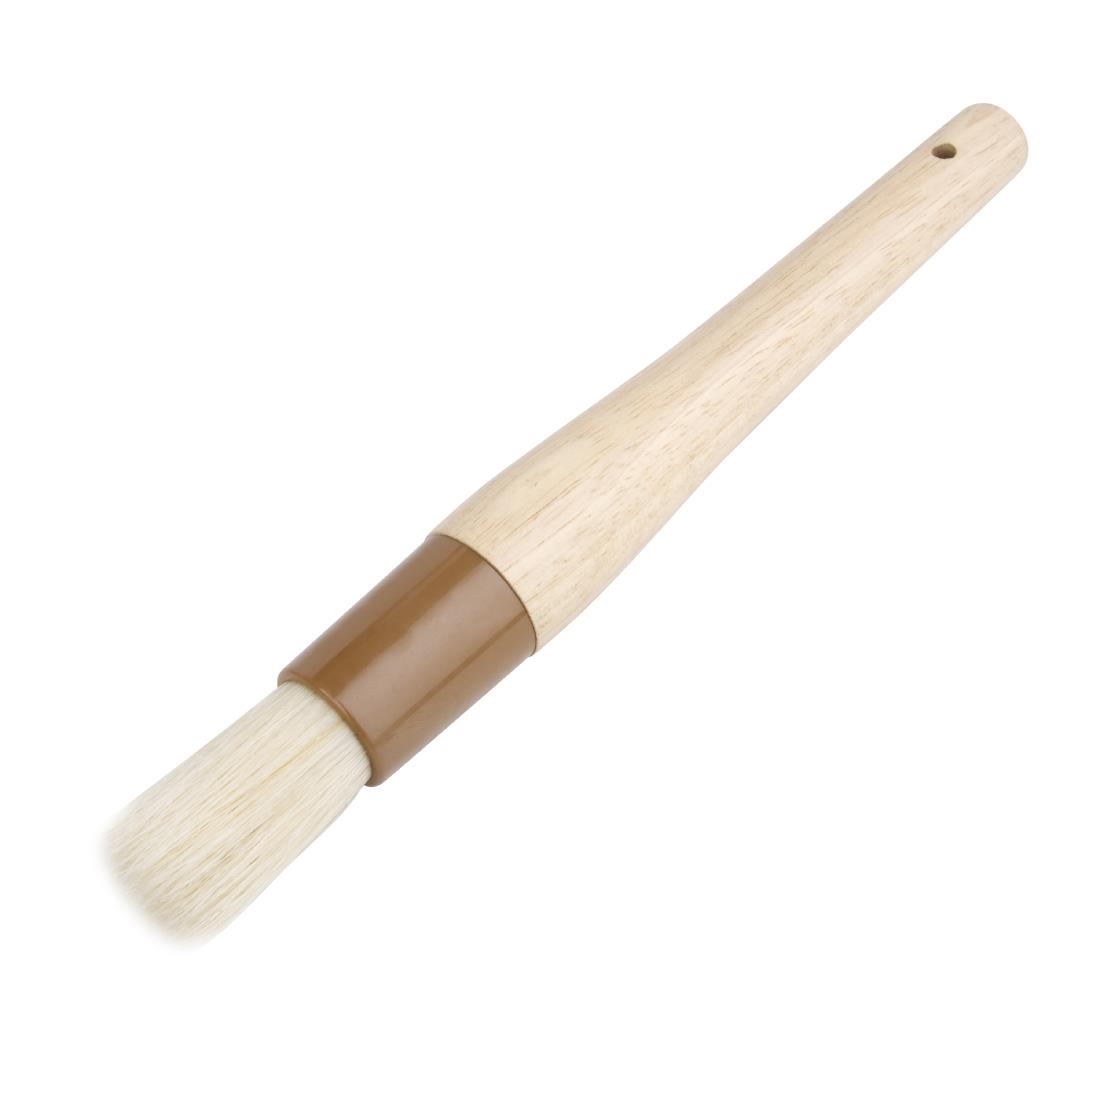 25 mm Wooden Handle Vogue Pastry Brush Round with Wide Flat Bristles 